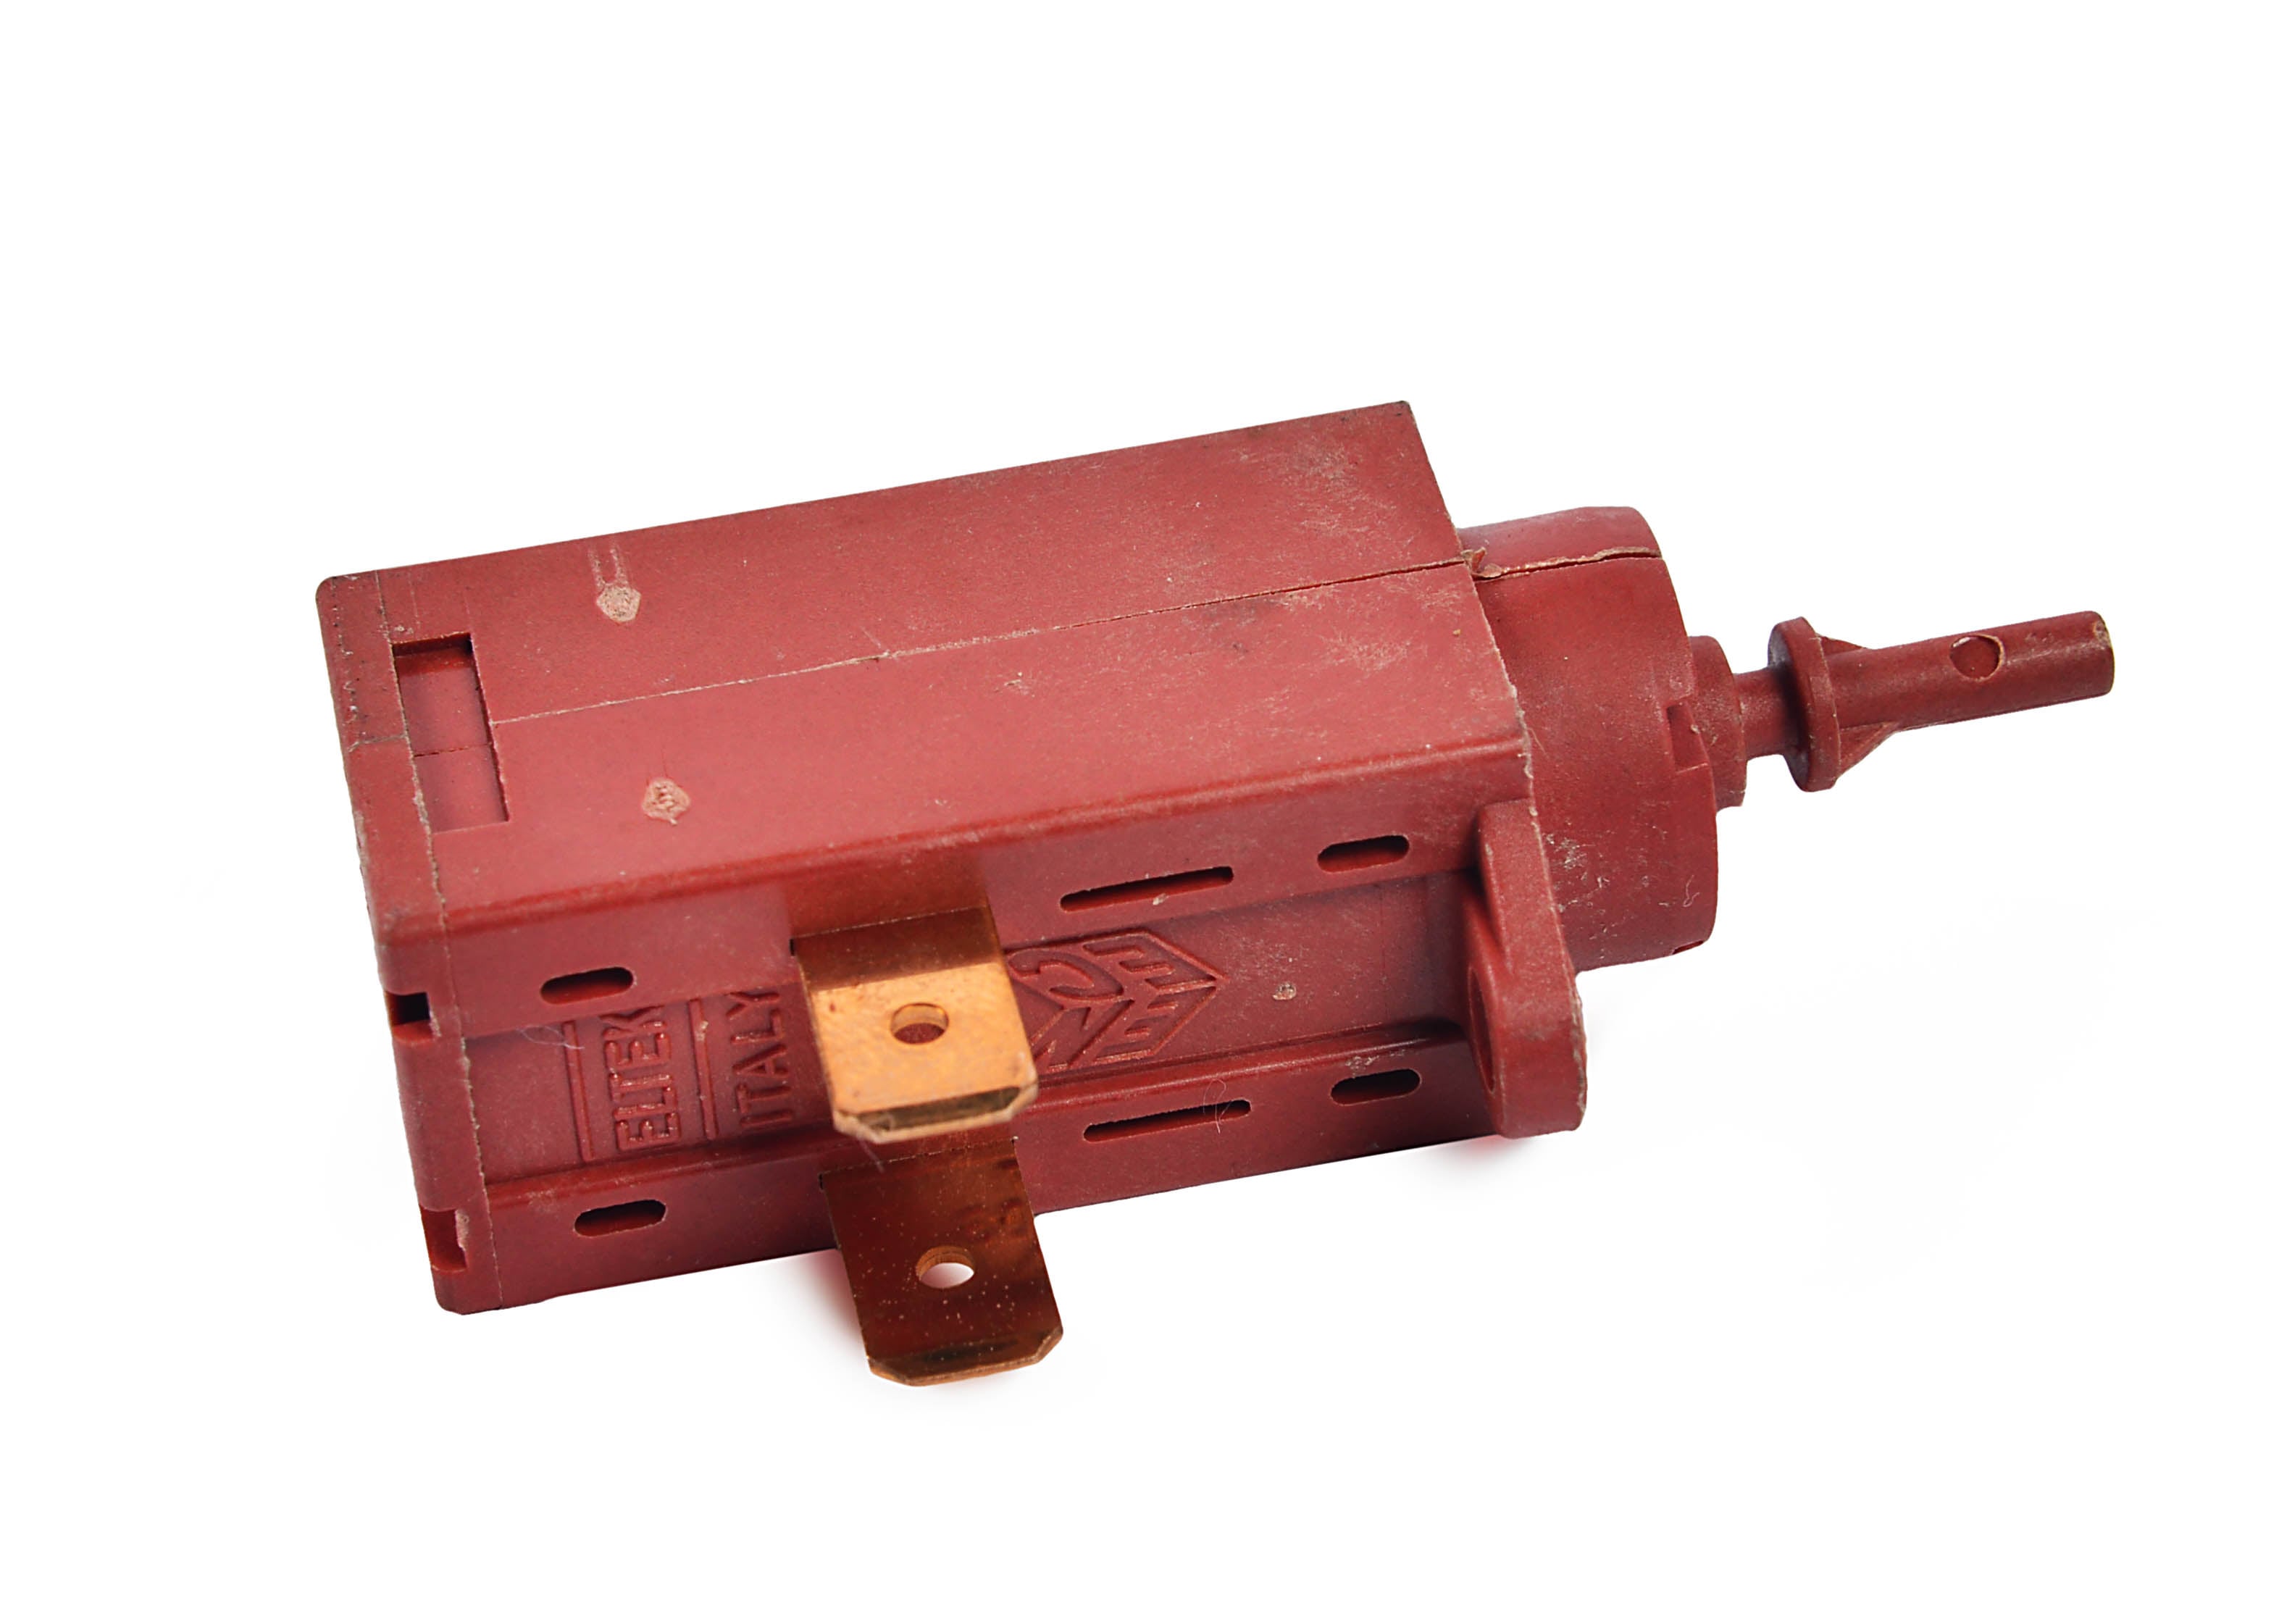 9586-001-001 THERMOACTUATOR FOR DEXTER WASHERS 